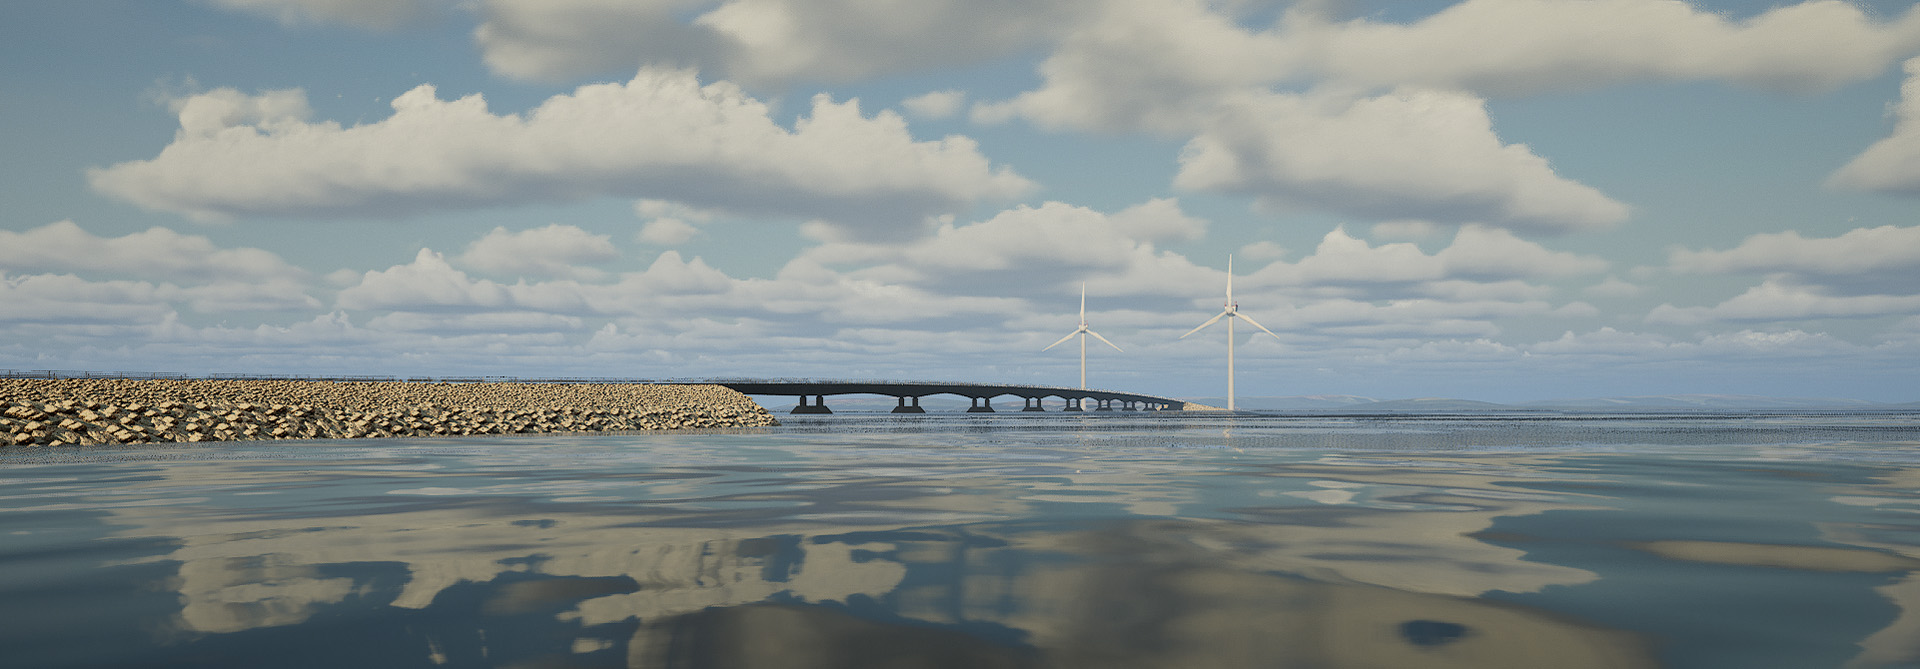 A road bridge crossing a sea area and two windmills.